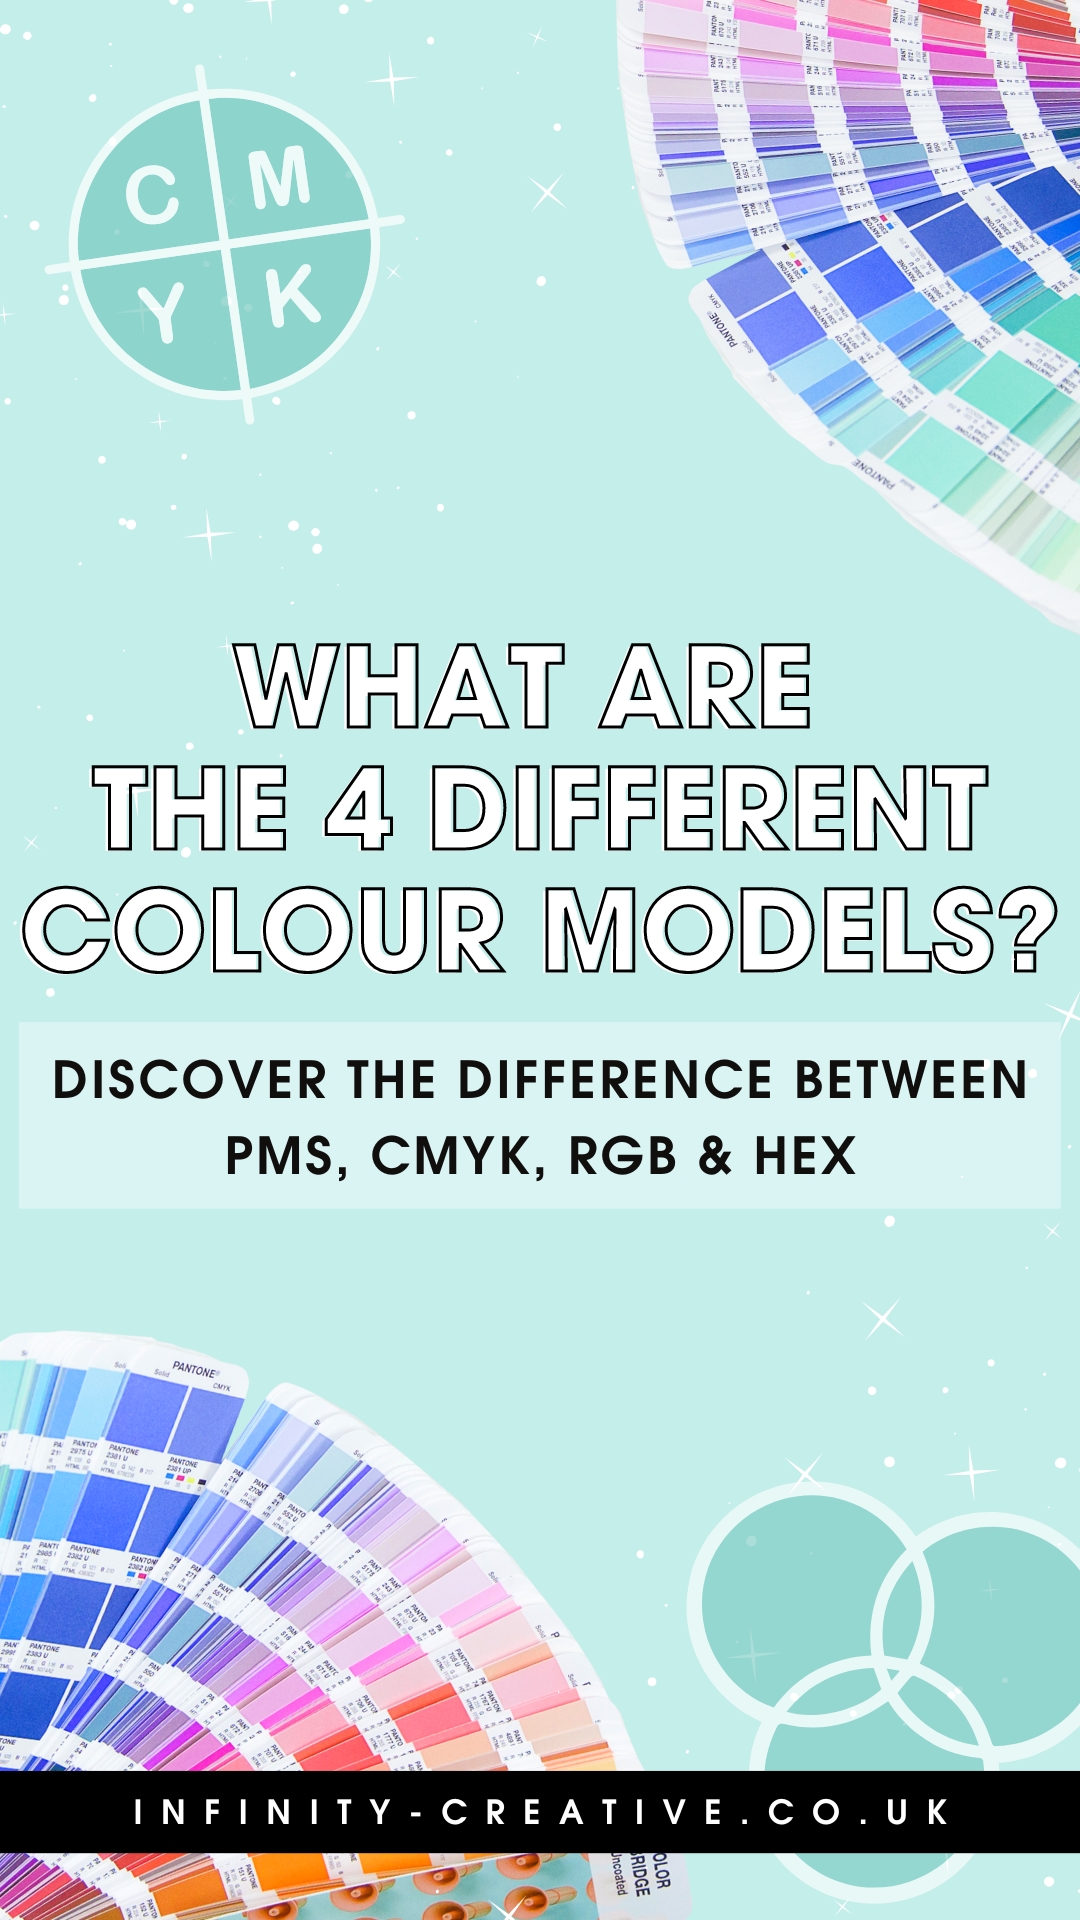 What Are The 4 Different Colour Models?